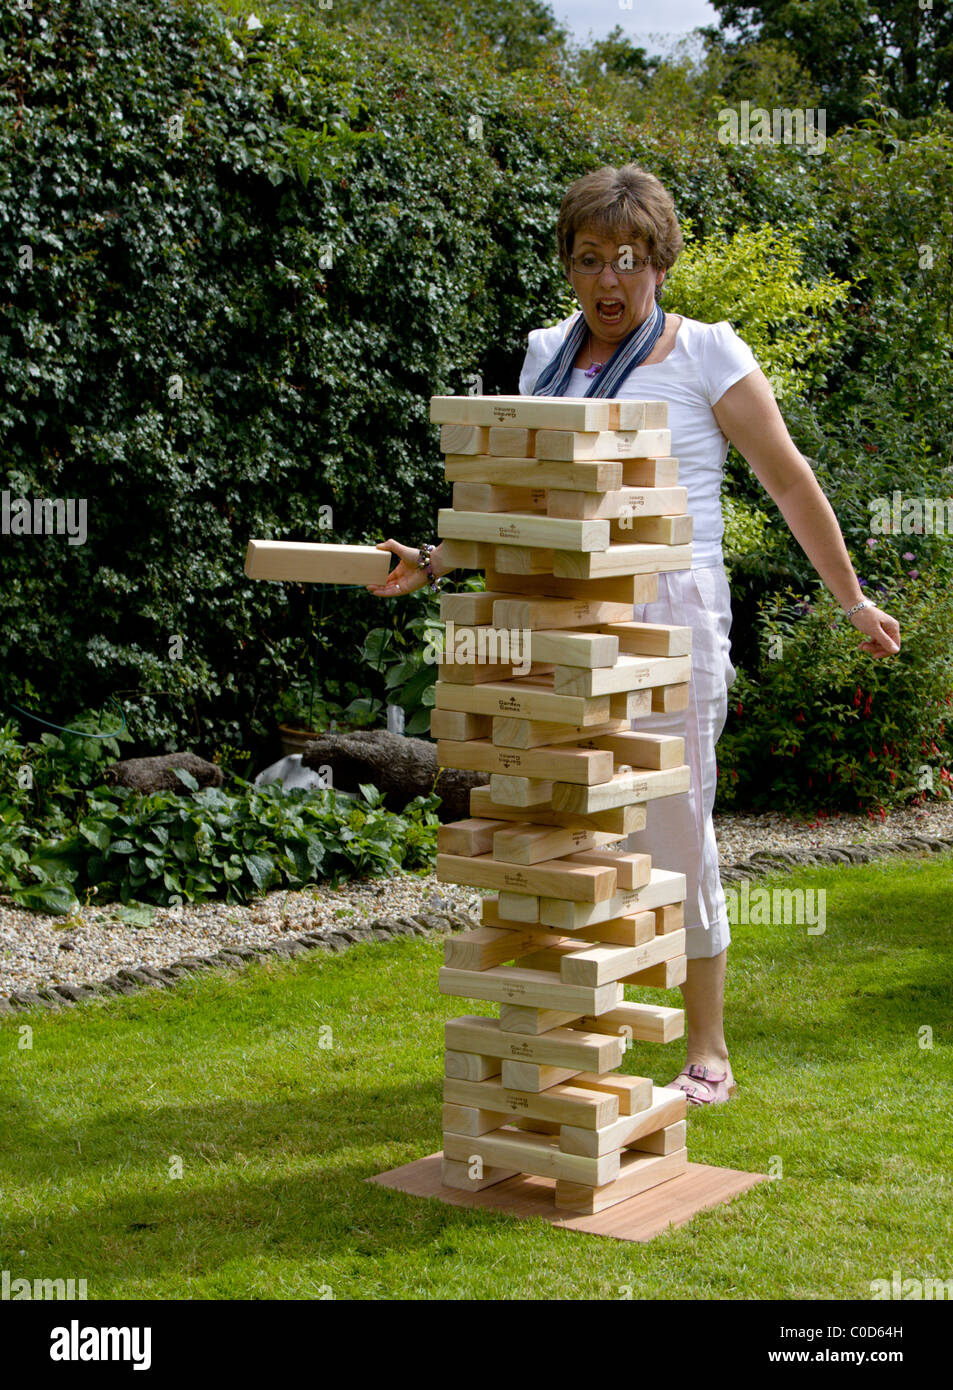 https://c8.alamy.com/comp/C0D64H/woman-playing-giant-jenga-game-in-the-garden-C0D64H.jpg